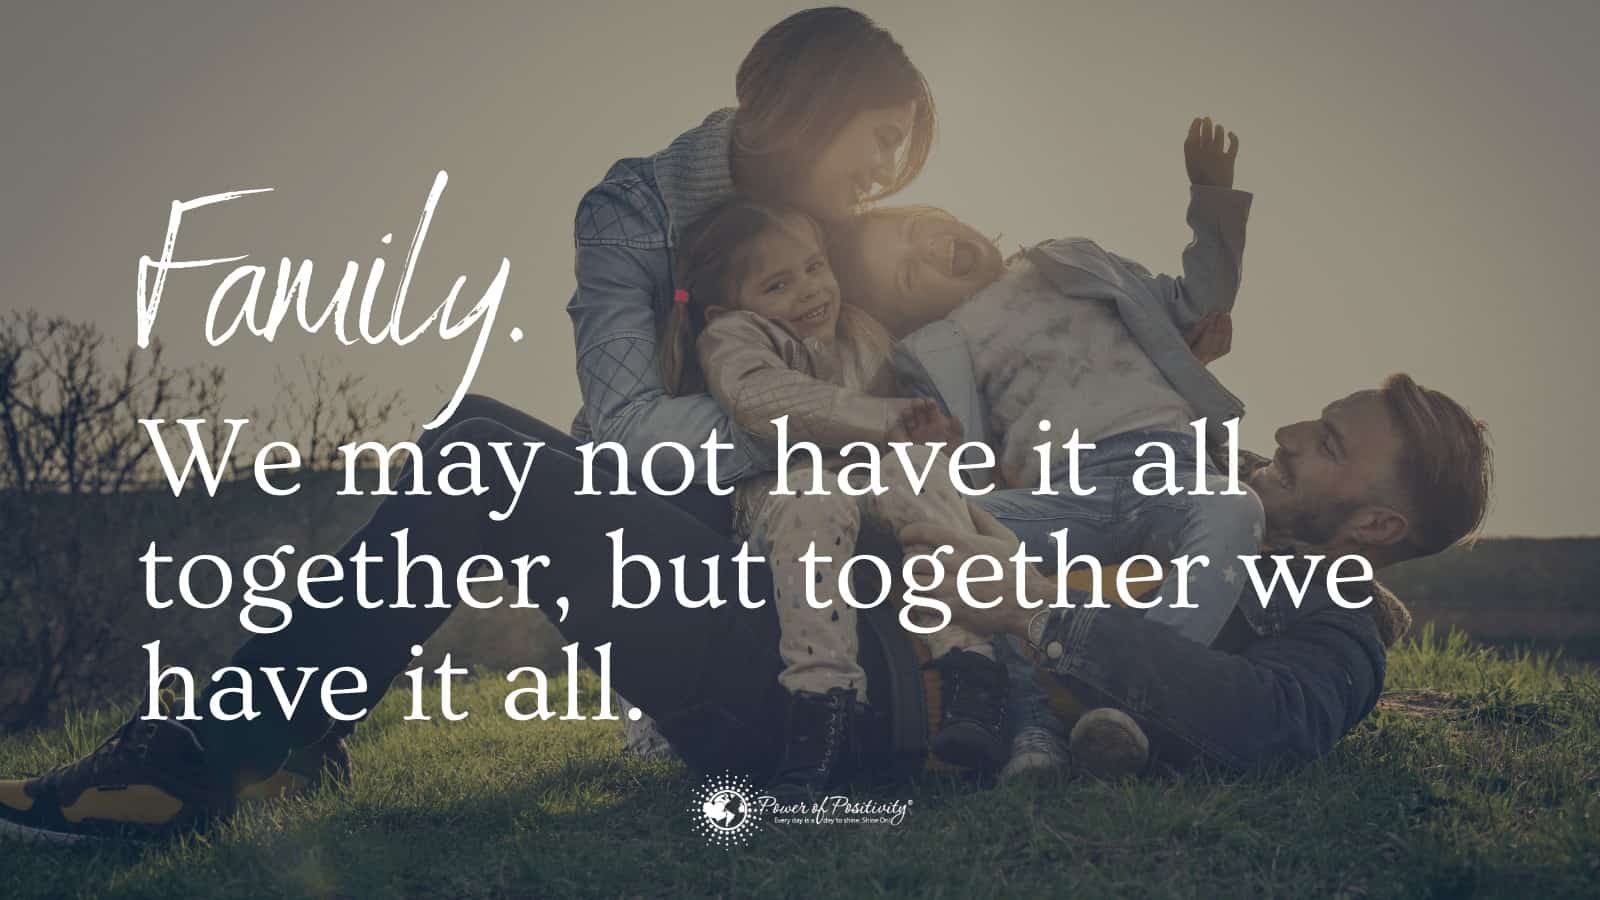 15 Quotes About Family to Build Stronger Bonds